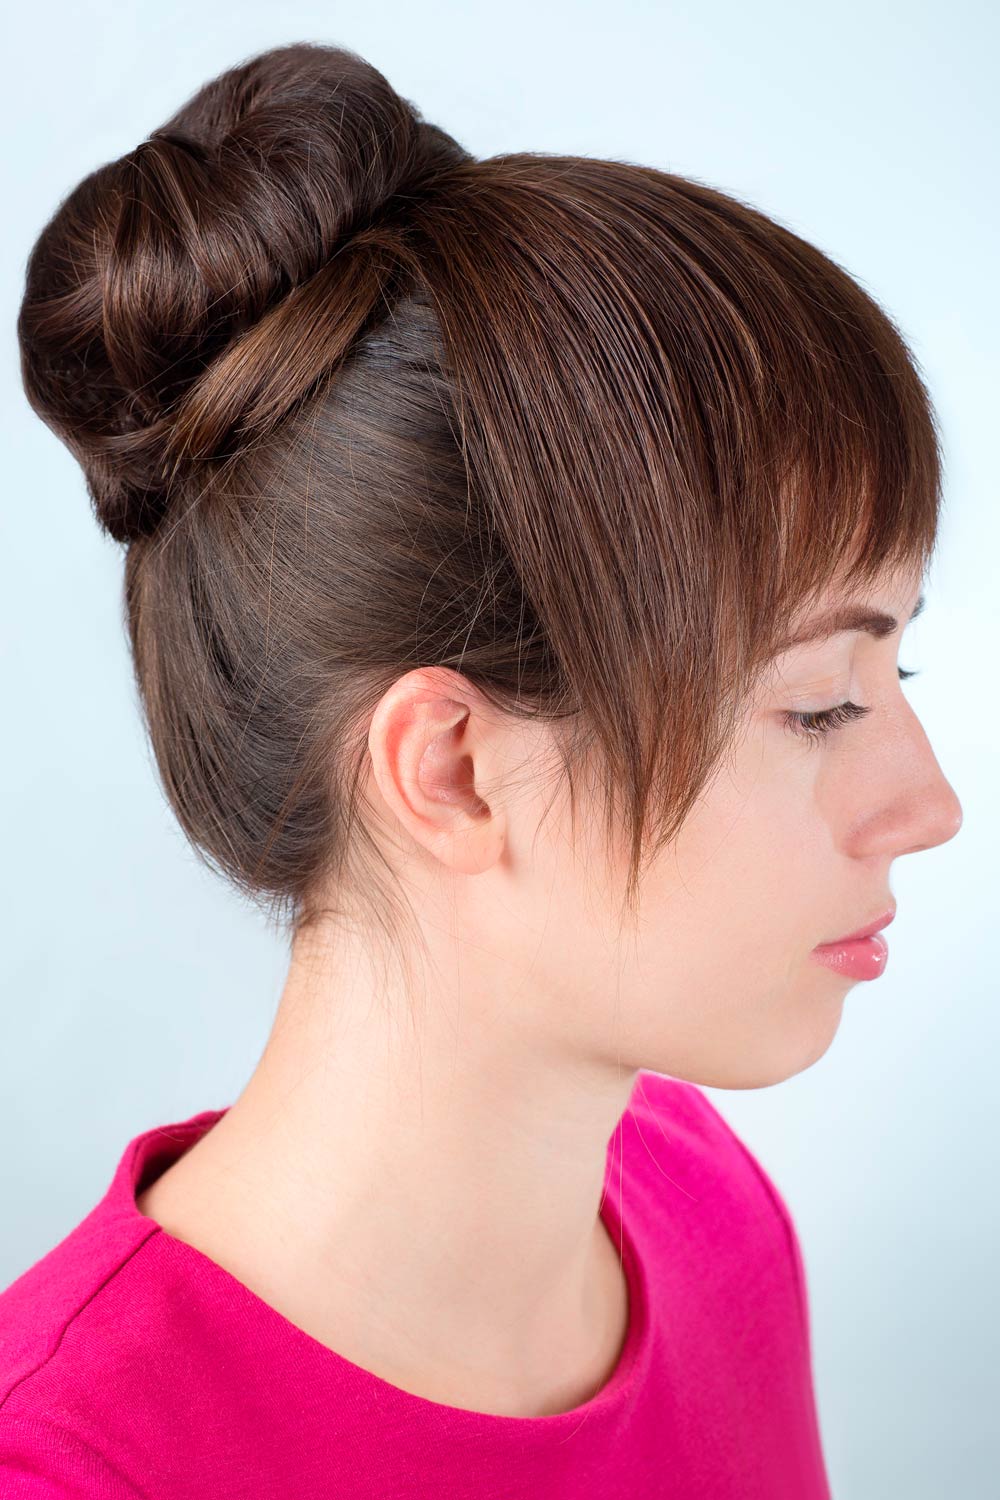 Updo Style with Fake Bangs